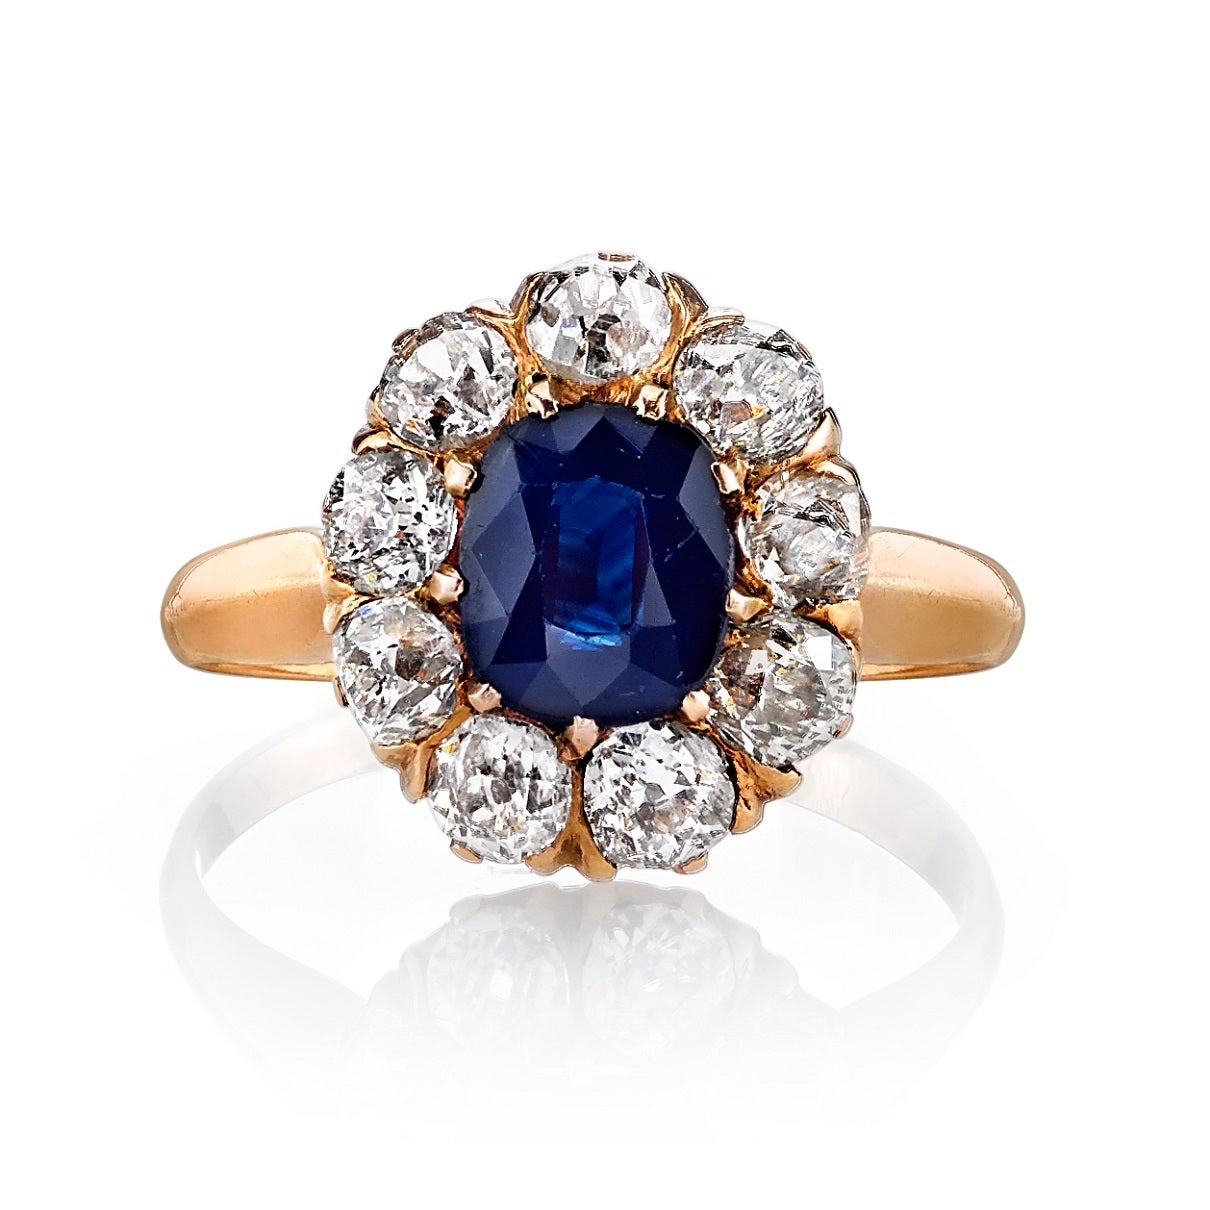 1.00ct Sapphire with 1.10cttw old Mine cut diamond accents set in a vintage 14k yellow gold mounting. Circa 1915.